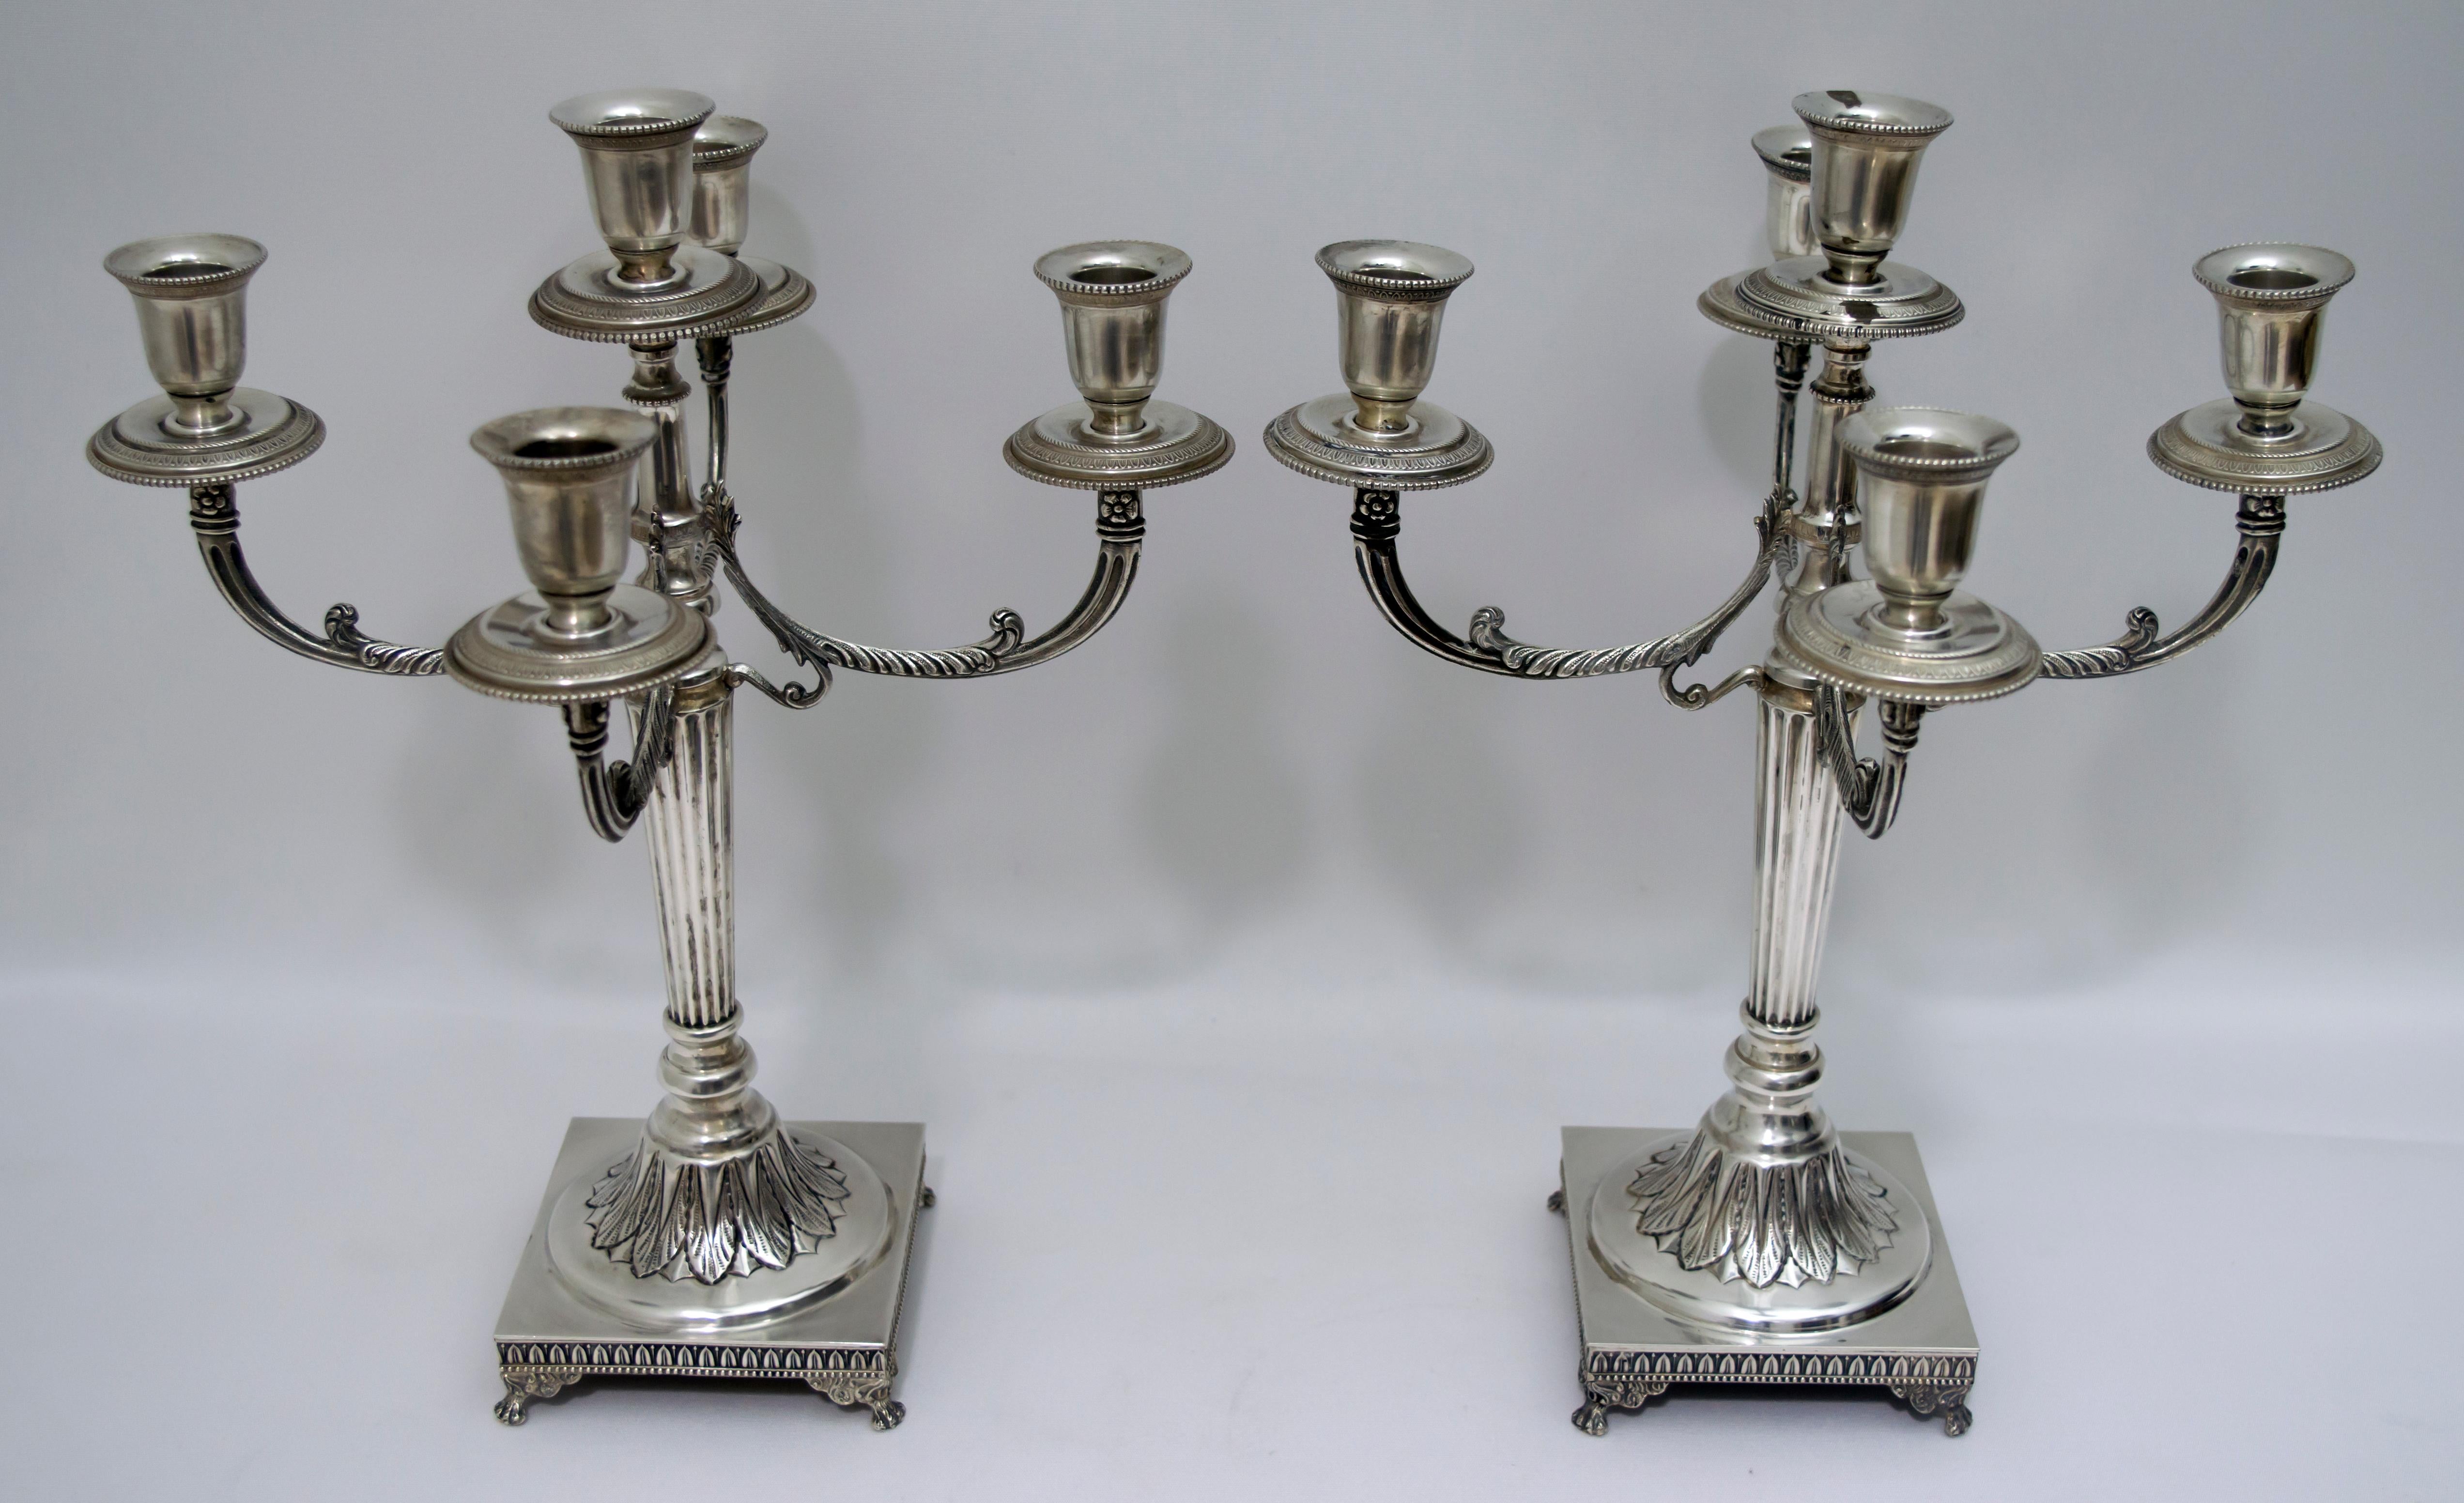 IPair of candleholders with 5 flames, in 800/000 silver
with silvery stamp 242 Fi Firenze F.LLI FOSSI
1950s era
1.625 kg
Silver title punch and silversmith present.